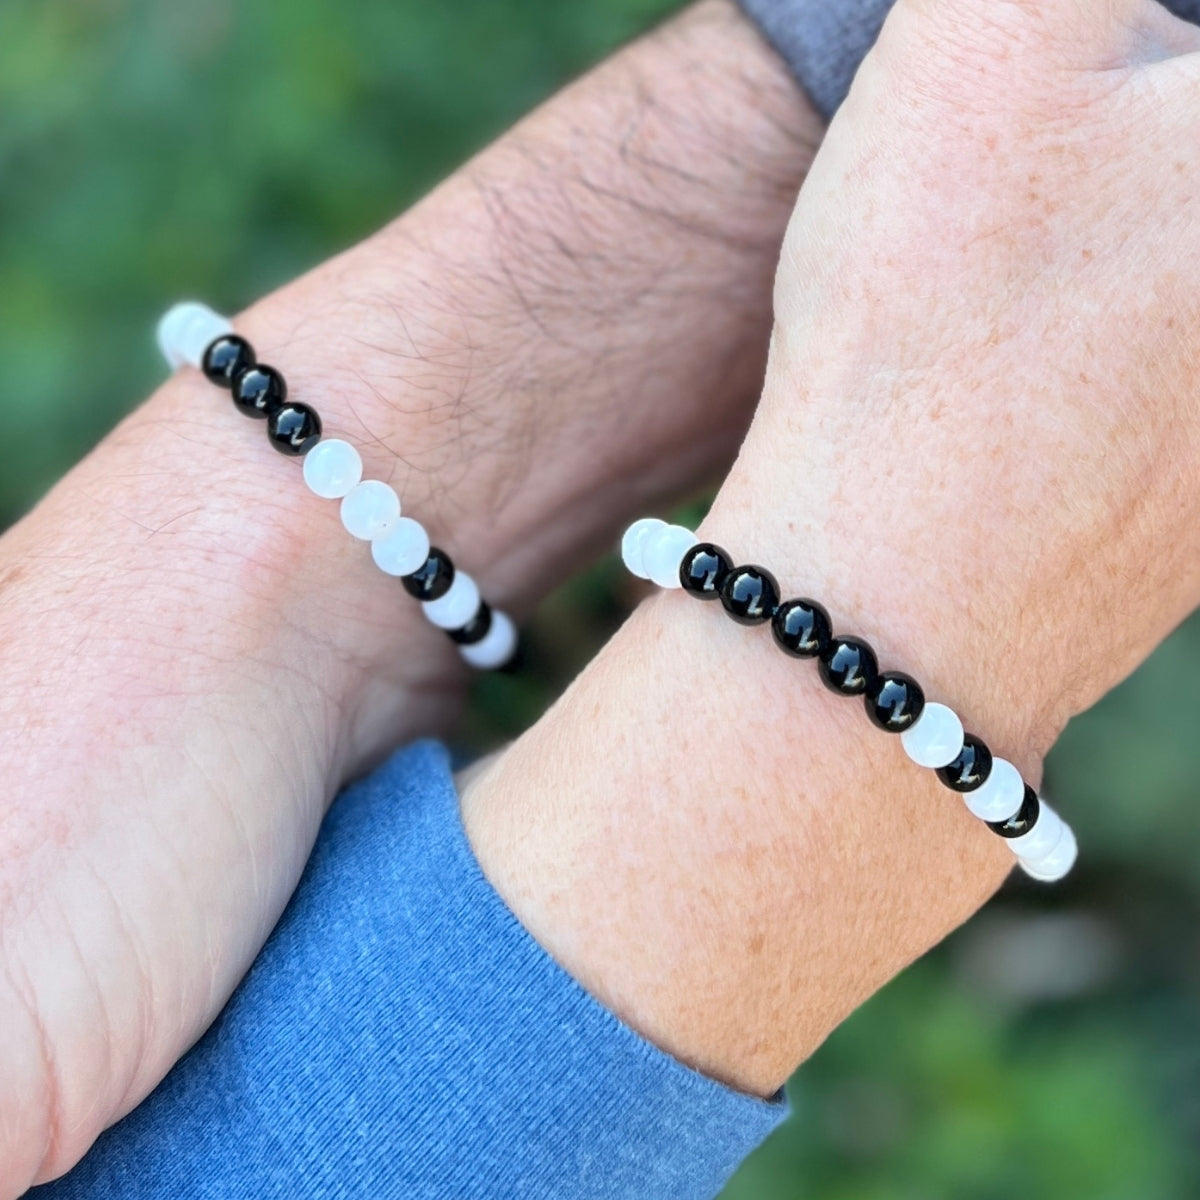 "I love you" morse code bracelets - a bracelet pair with a hidden message that will always connect you two. ❤️    ooo-oo--ooo-o-o-----oo-   Say "I love you" with this healing gemstone bracelet pair. It connects you two in a special bond.📿❤️